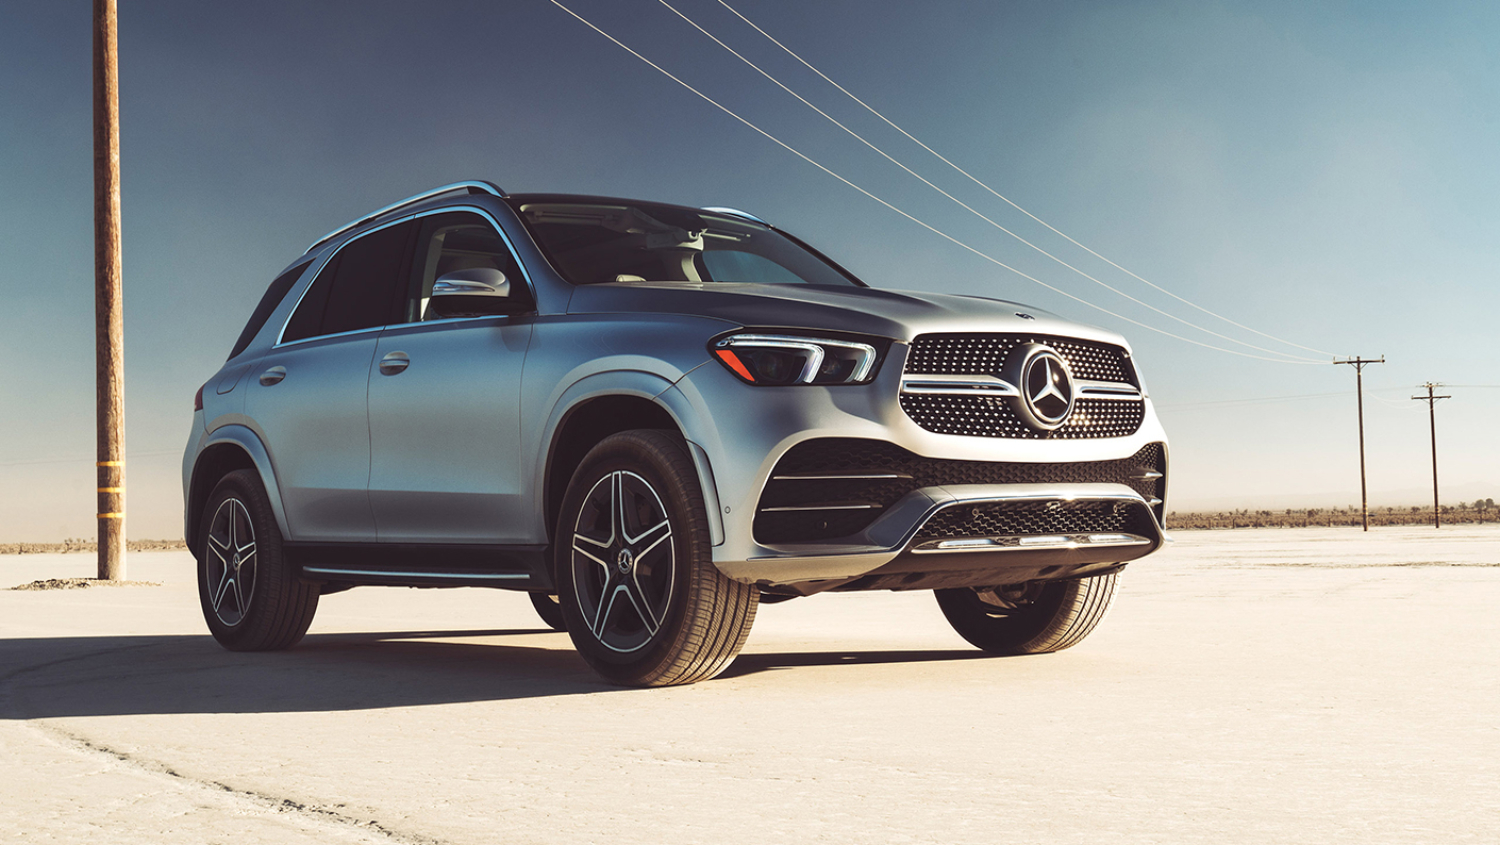 SUVs with the greatest risk of problems include this Mercedes-Benz GLE